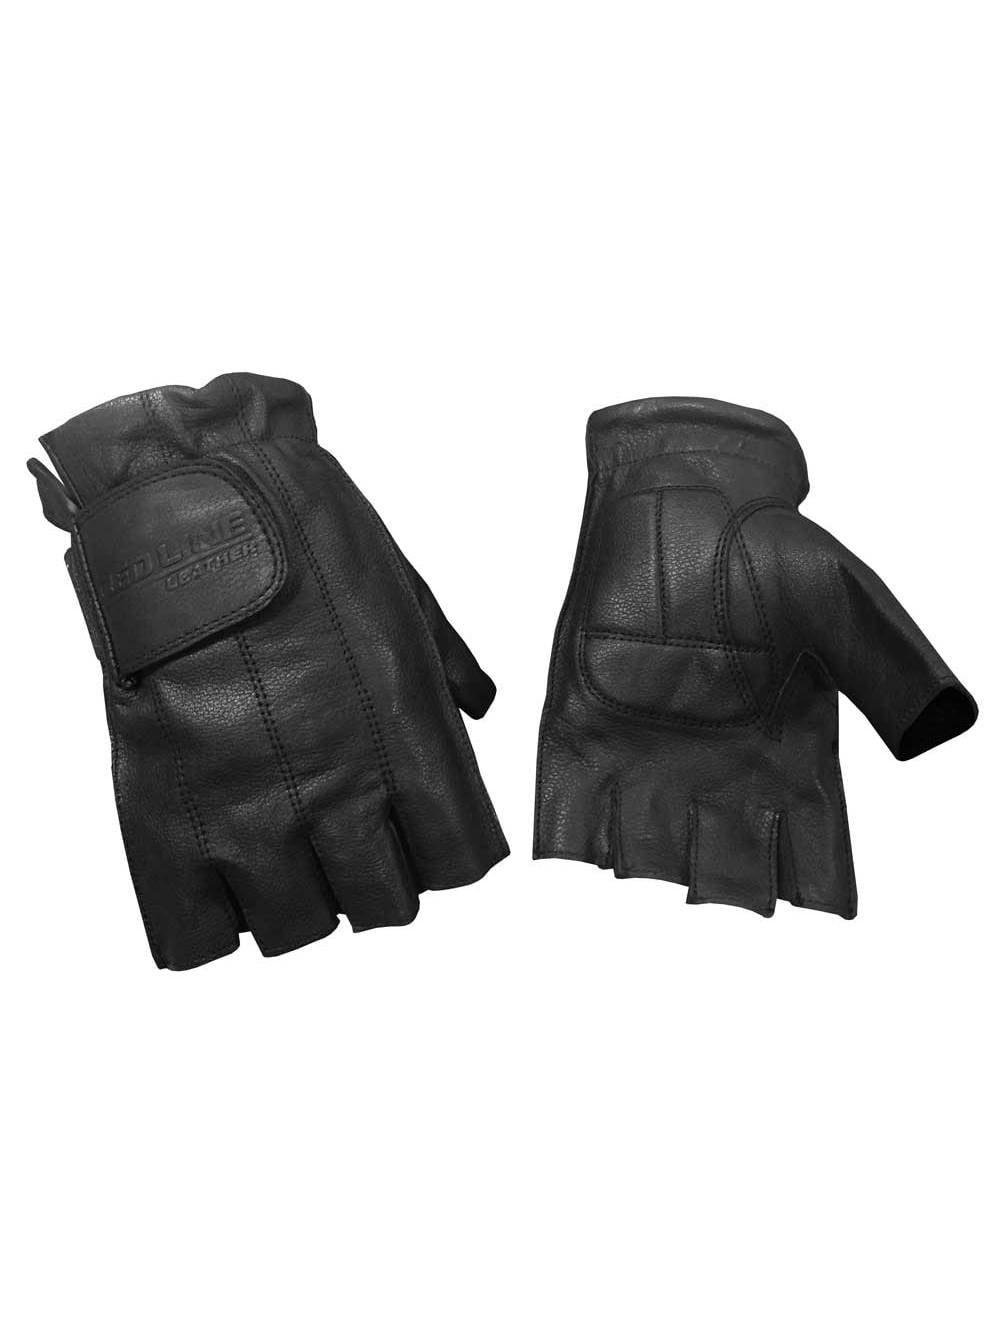 MENS MOTORCYCLE BUTTER SOFT PERFORATED CRUISER LEATHER GLOVES W/GEL PALM SOFT